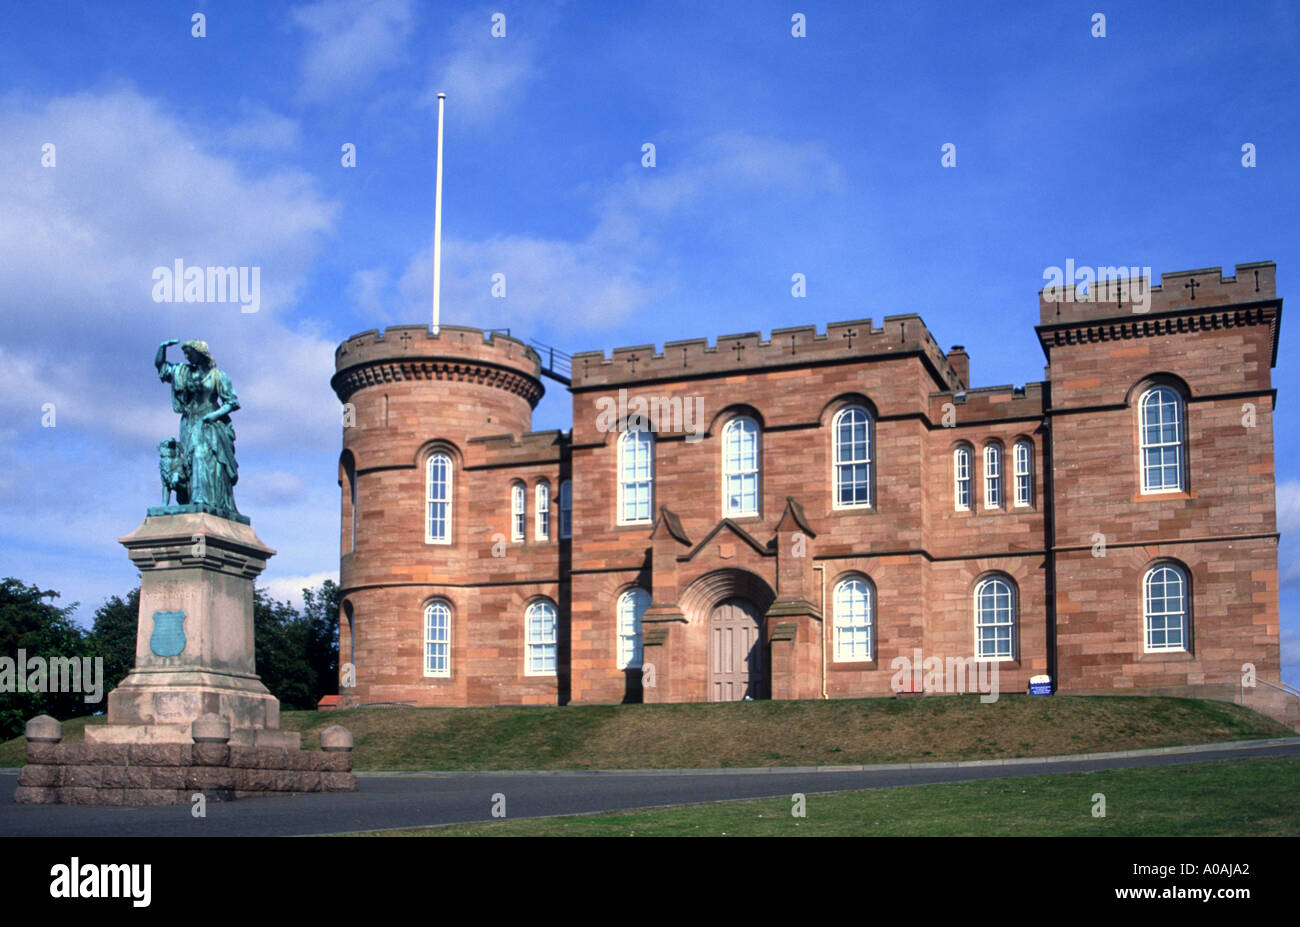 Inverness Castle Inverness Scotland with statue of Flora McDonald in front Stock Photo